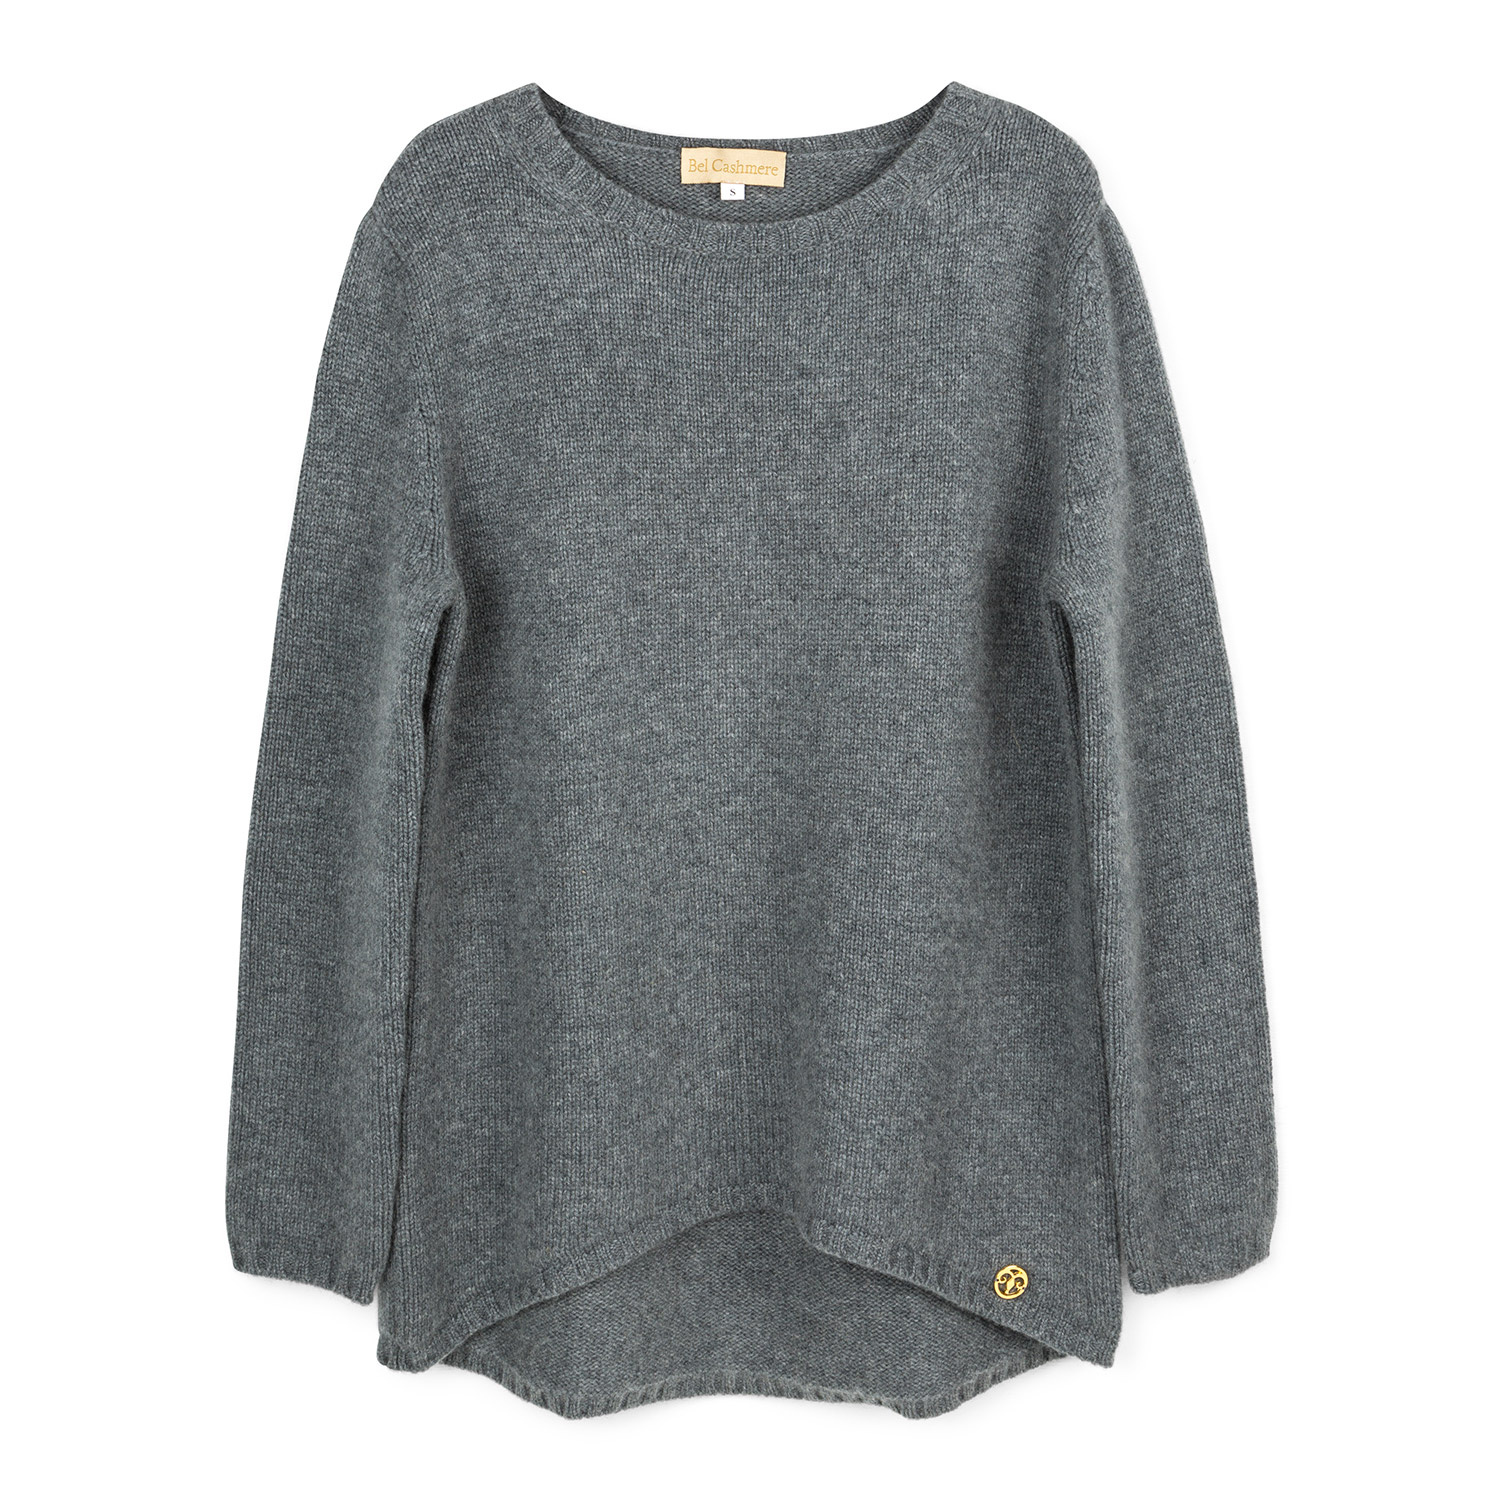 Oversize cashmere sweater in grey - Bel cashmere